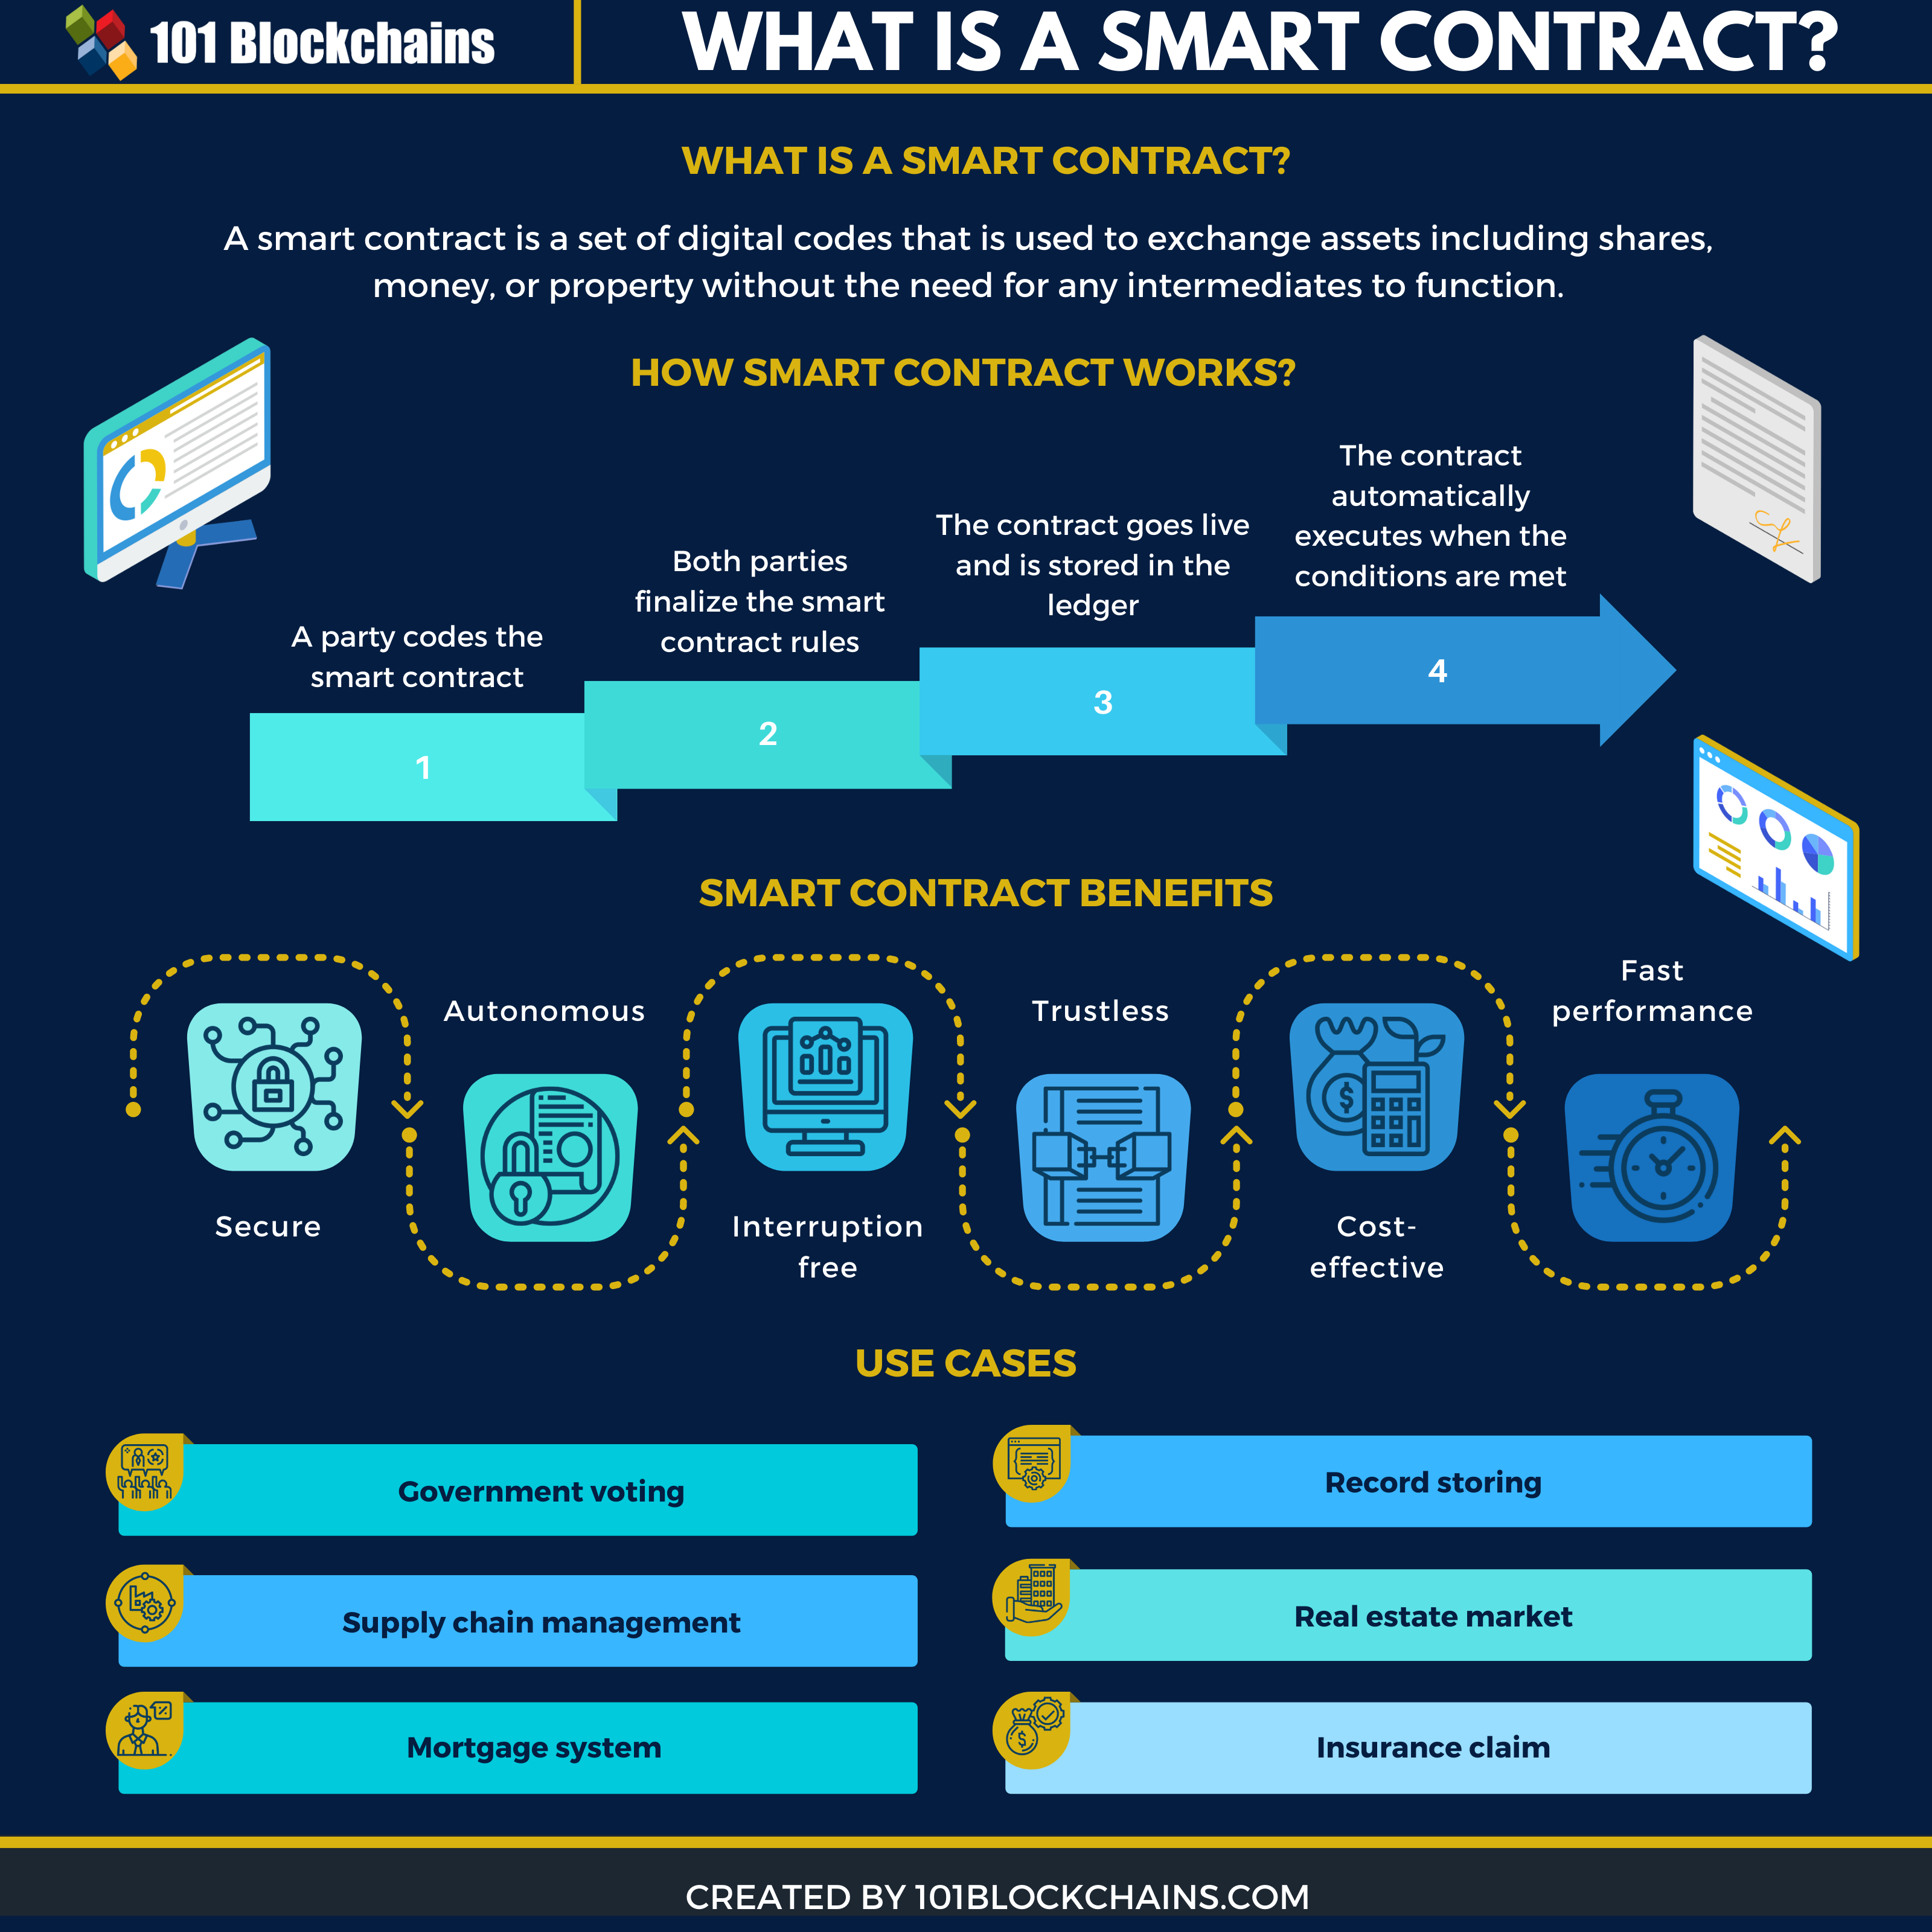 What is a Smart Contract in Blockchain and How Does it Work?